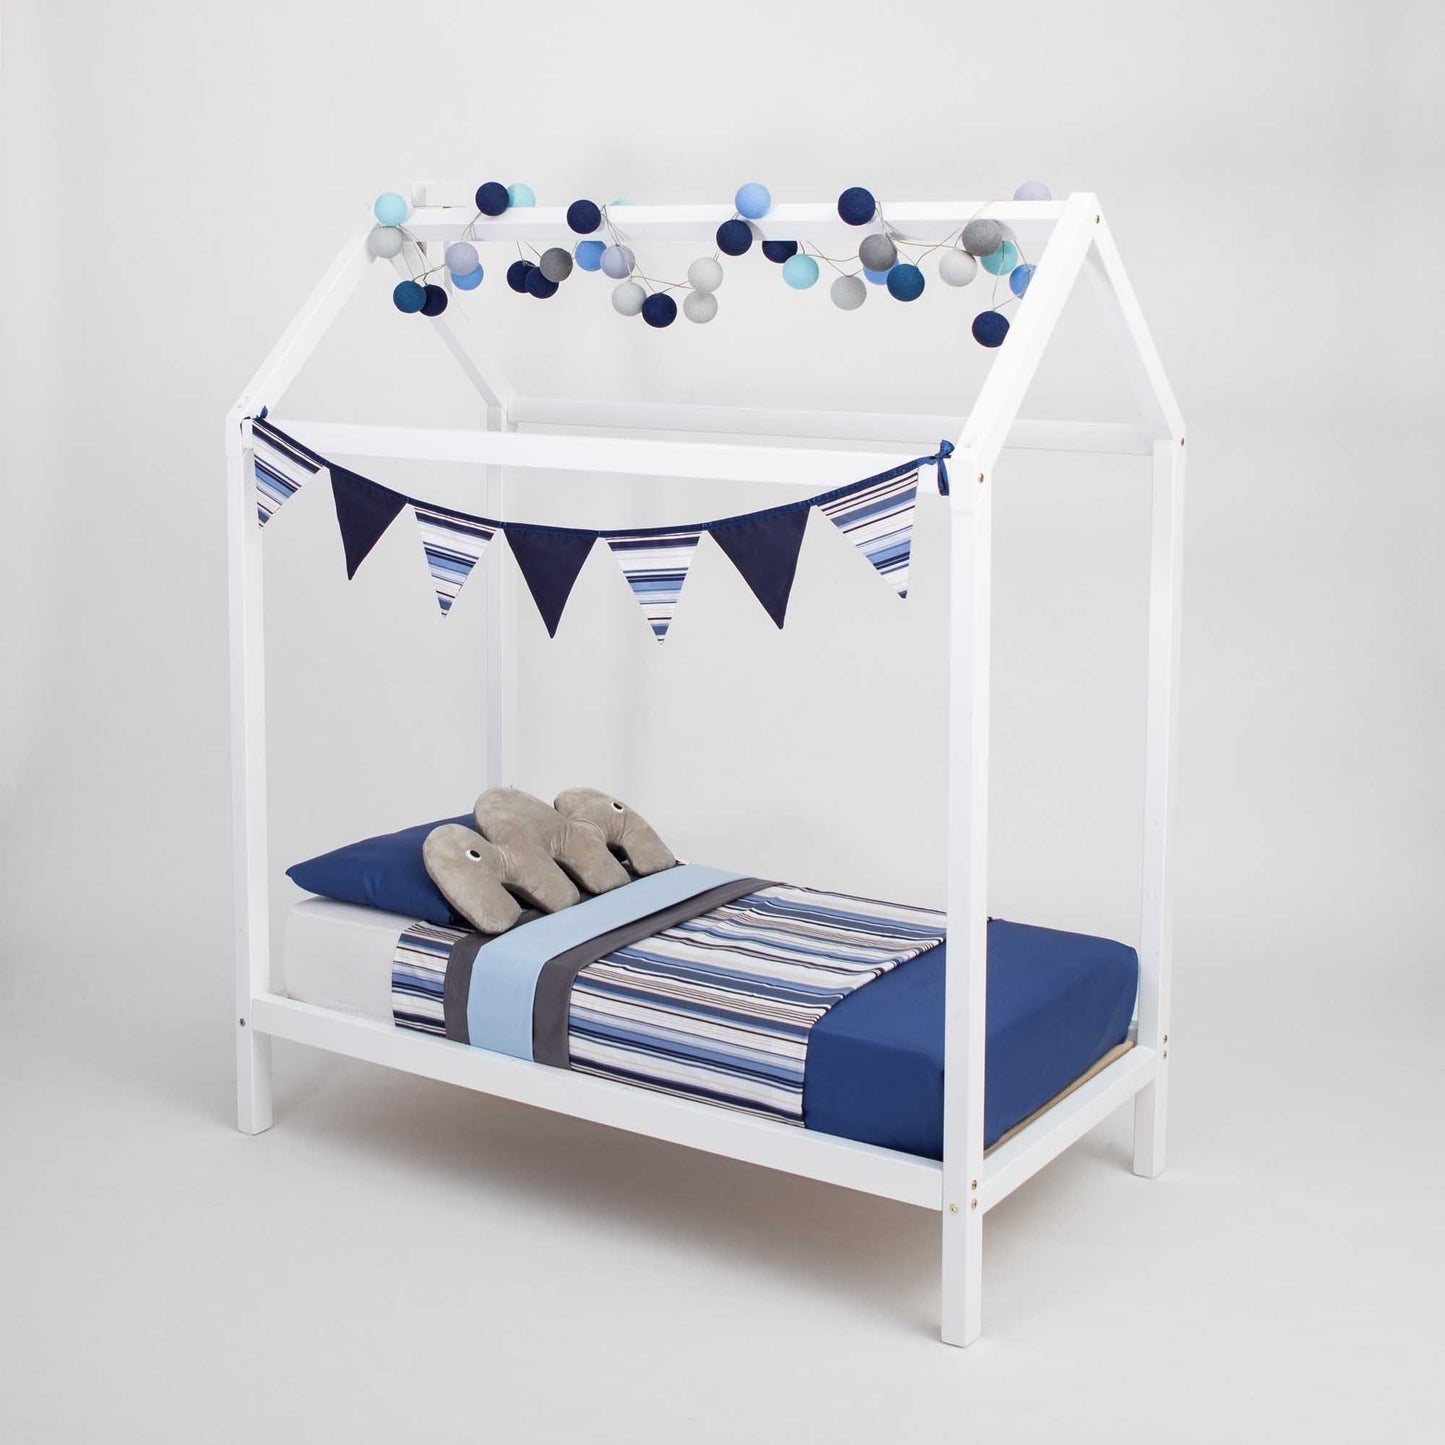 A boy's wooden house bed on legs with blue and white stripes and bunting.